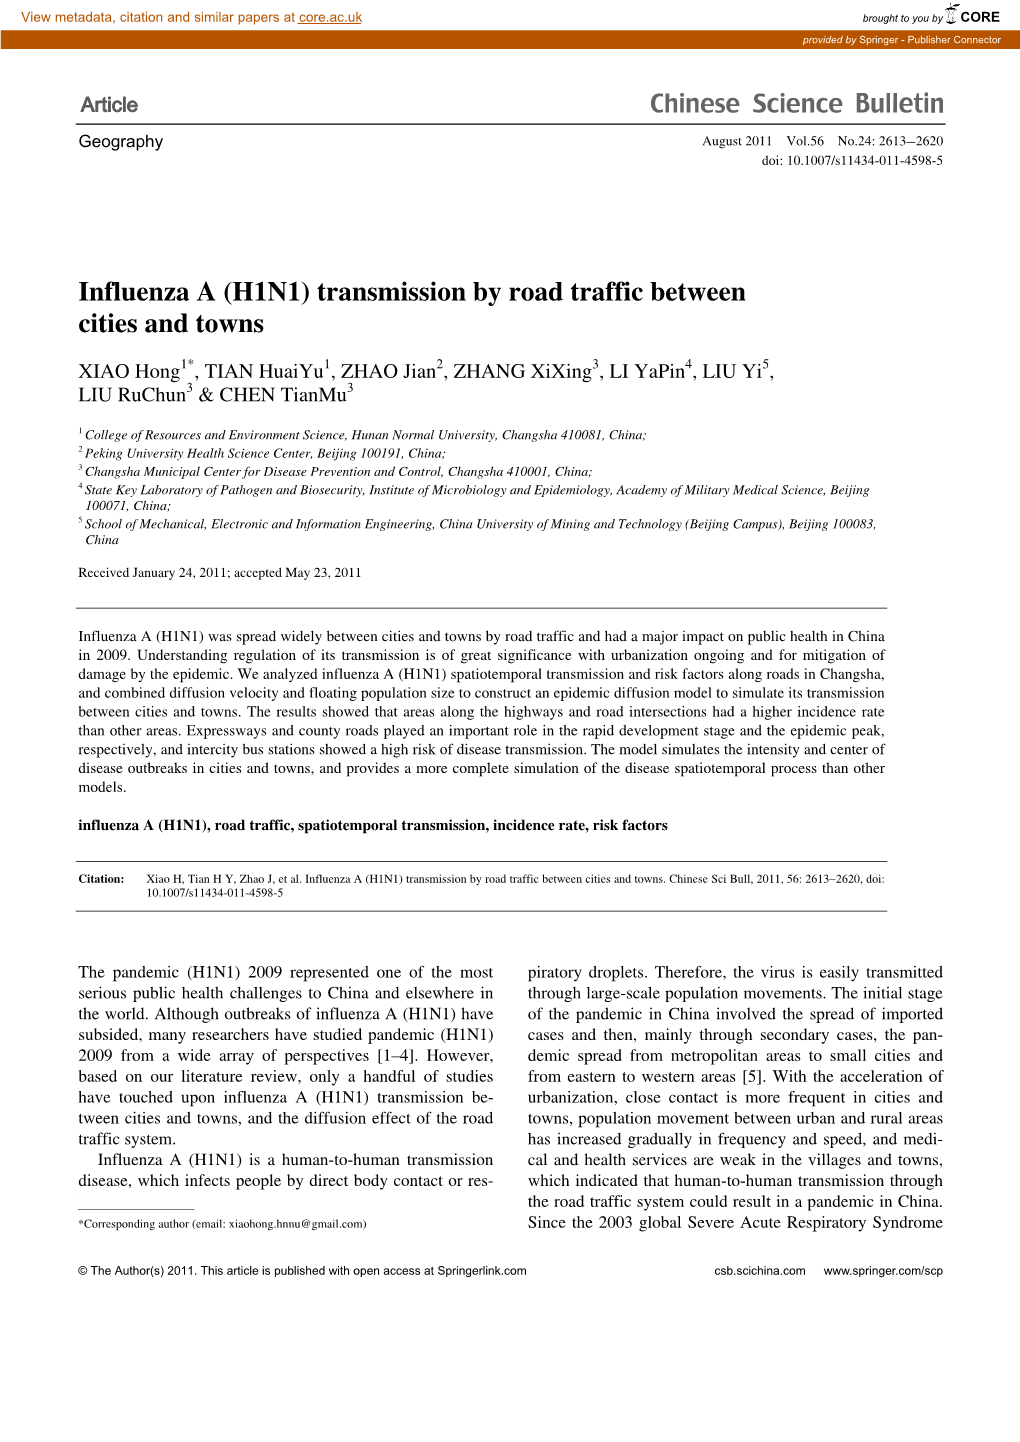 Influenza a (H1N1) Transmission by Road Traffic Between Cities and Towns